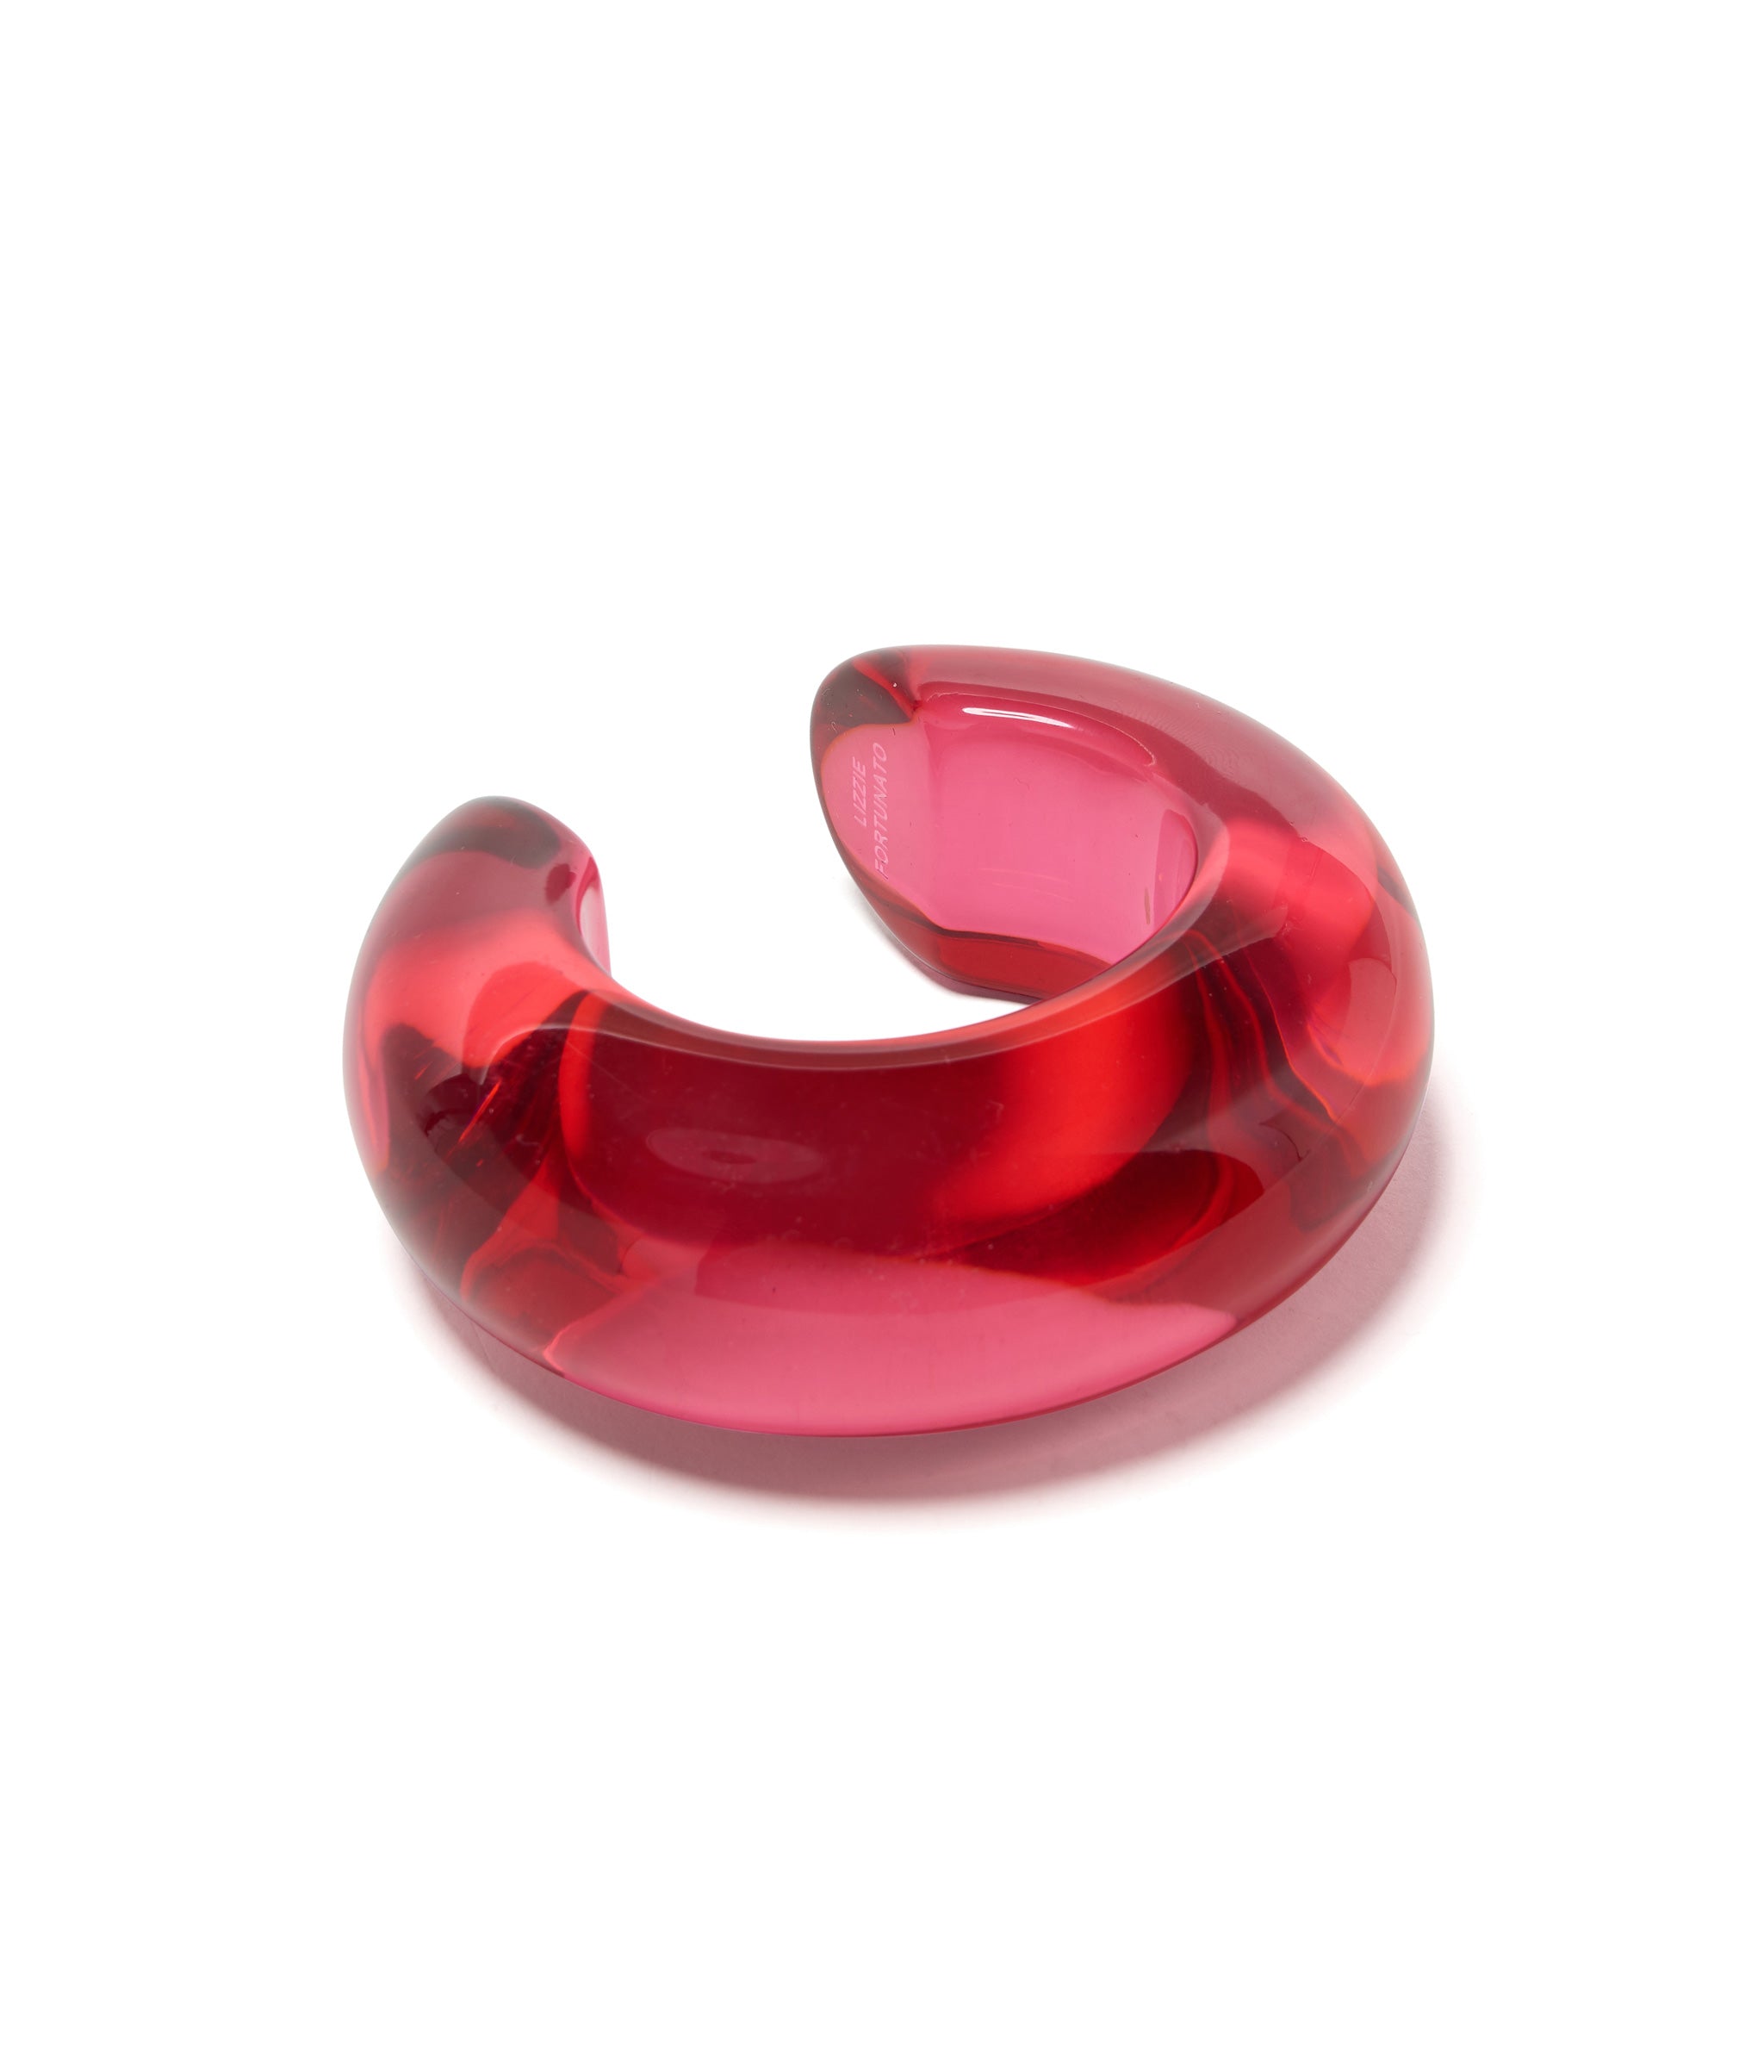 Arc Cuff in Magenta. Chunky bracelet made of hot pink-hued resin.